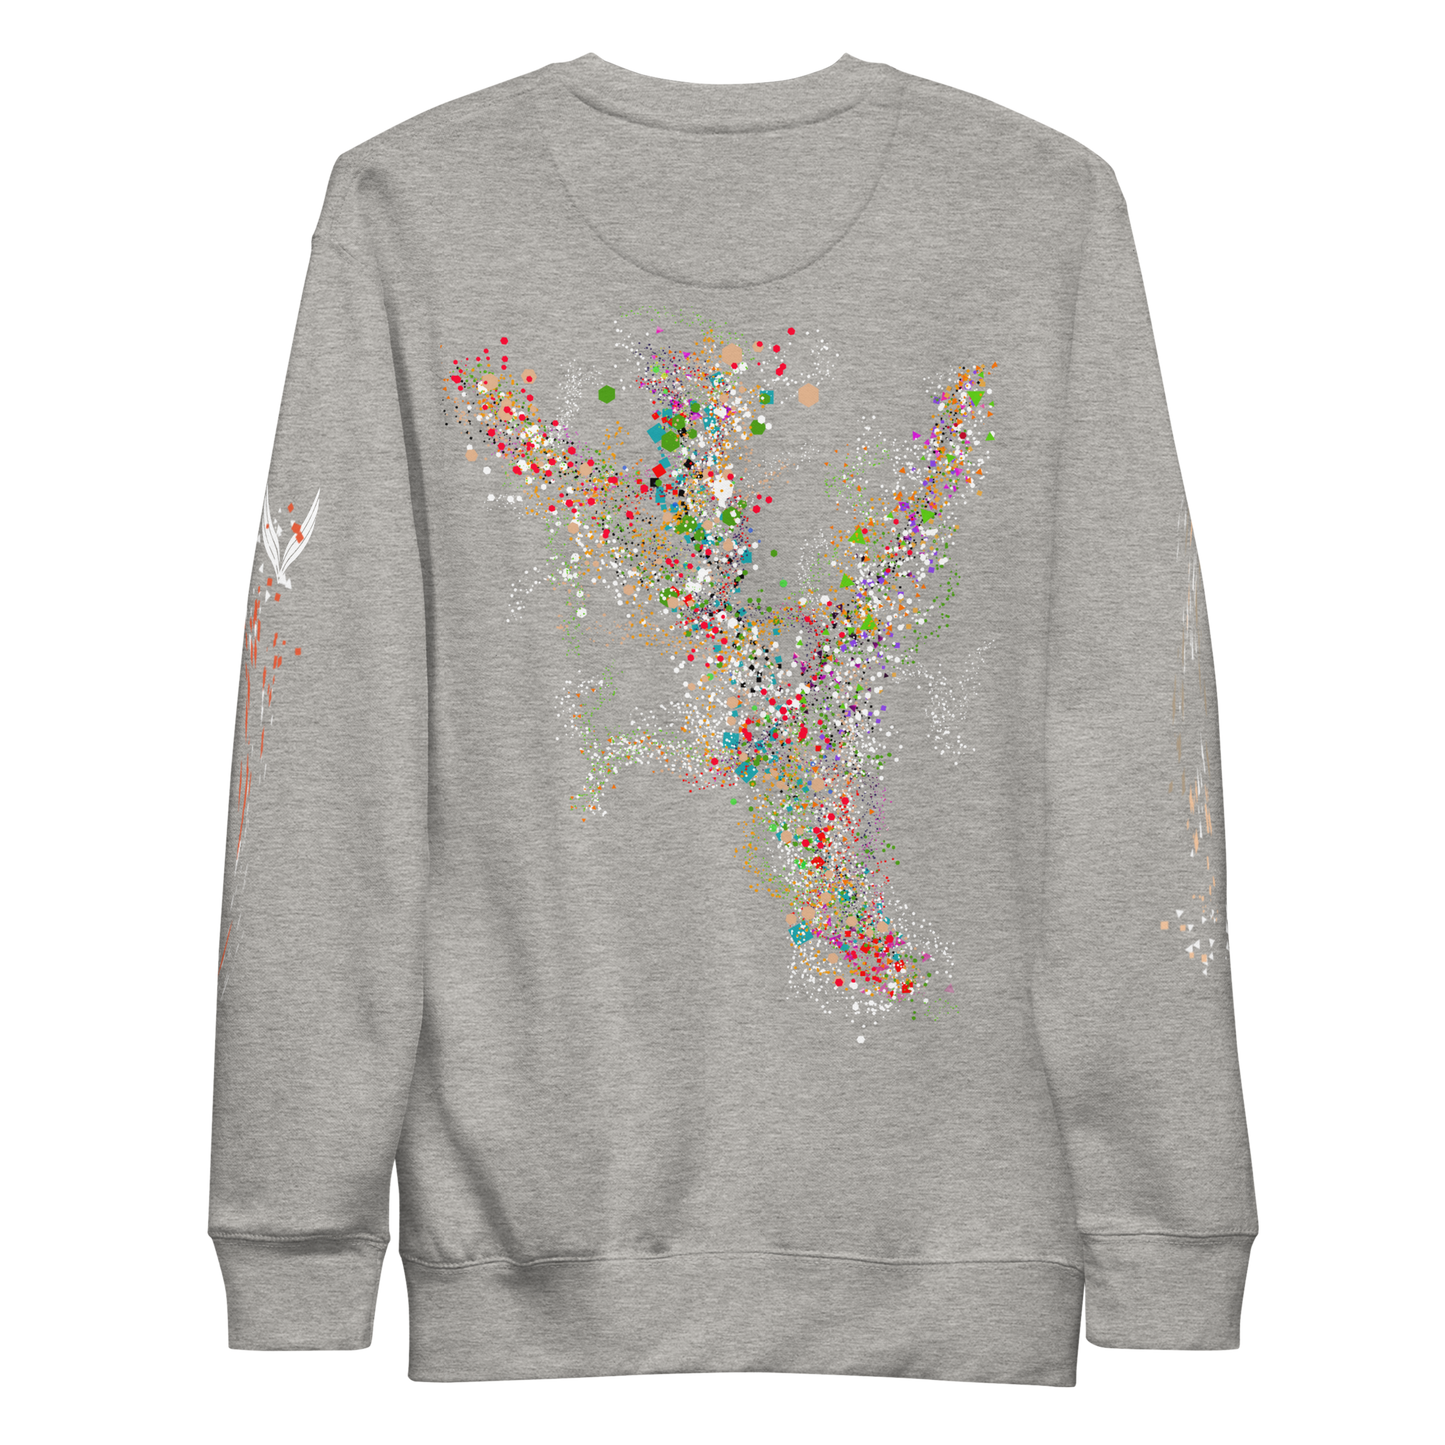 The Cosmic Synchronicity Sweatshirt: A Collaboration with Tim. On grey back,  The back image shines light on that which we are not always able to see. An energy of purpose and passion, as alive as the birds in the sky and as great as the vastness of the universe. Even in moments where the darkness feels absolute, the light still burns within us each, and this power that we all share connects us more than the very cells in our bodies. 